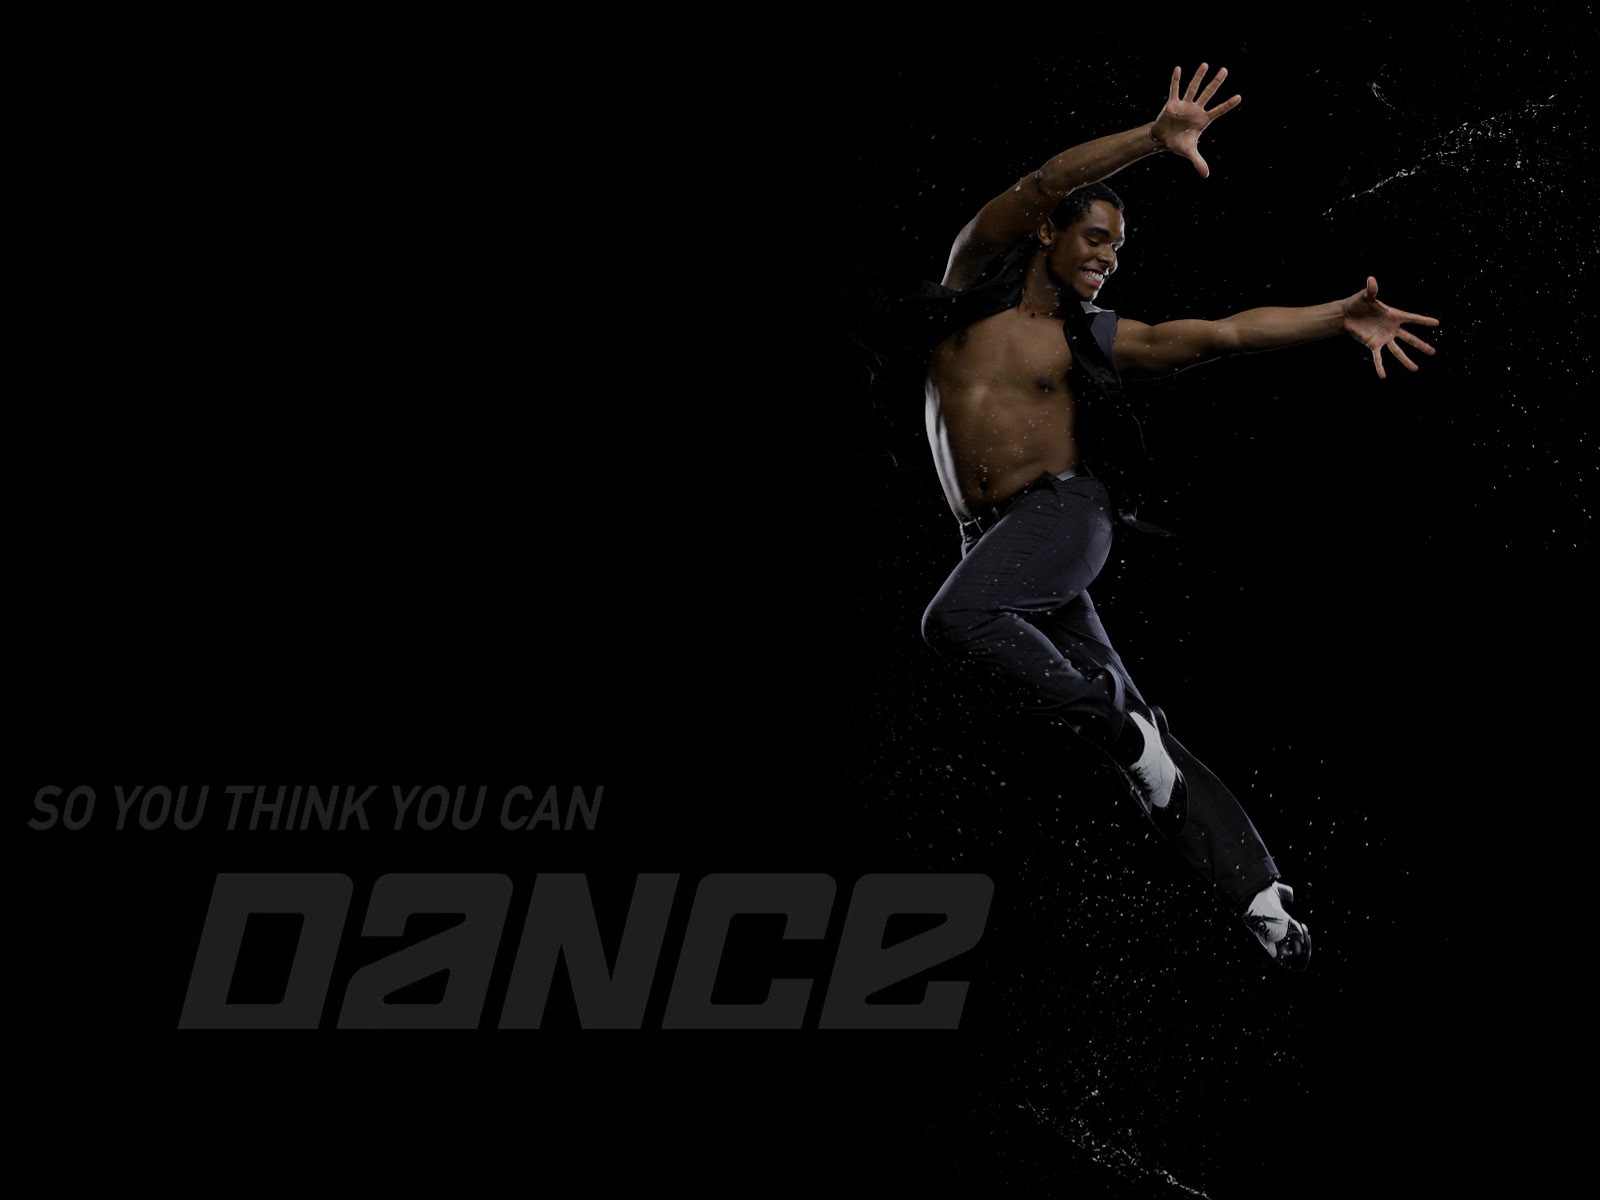 So You Think You Can Dance wallpaper (2) #20 - 1600x1200